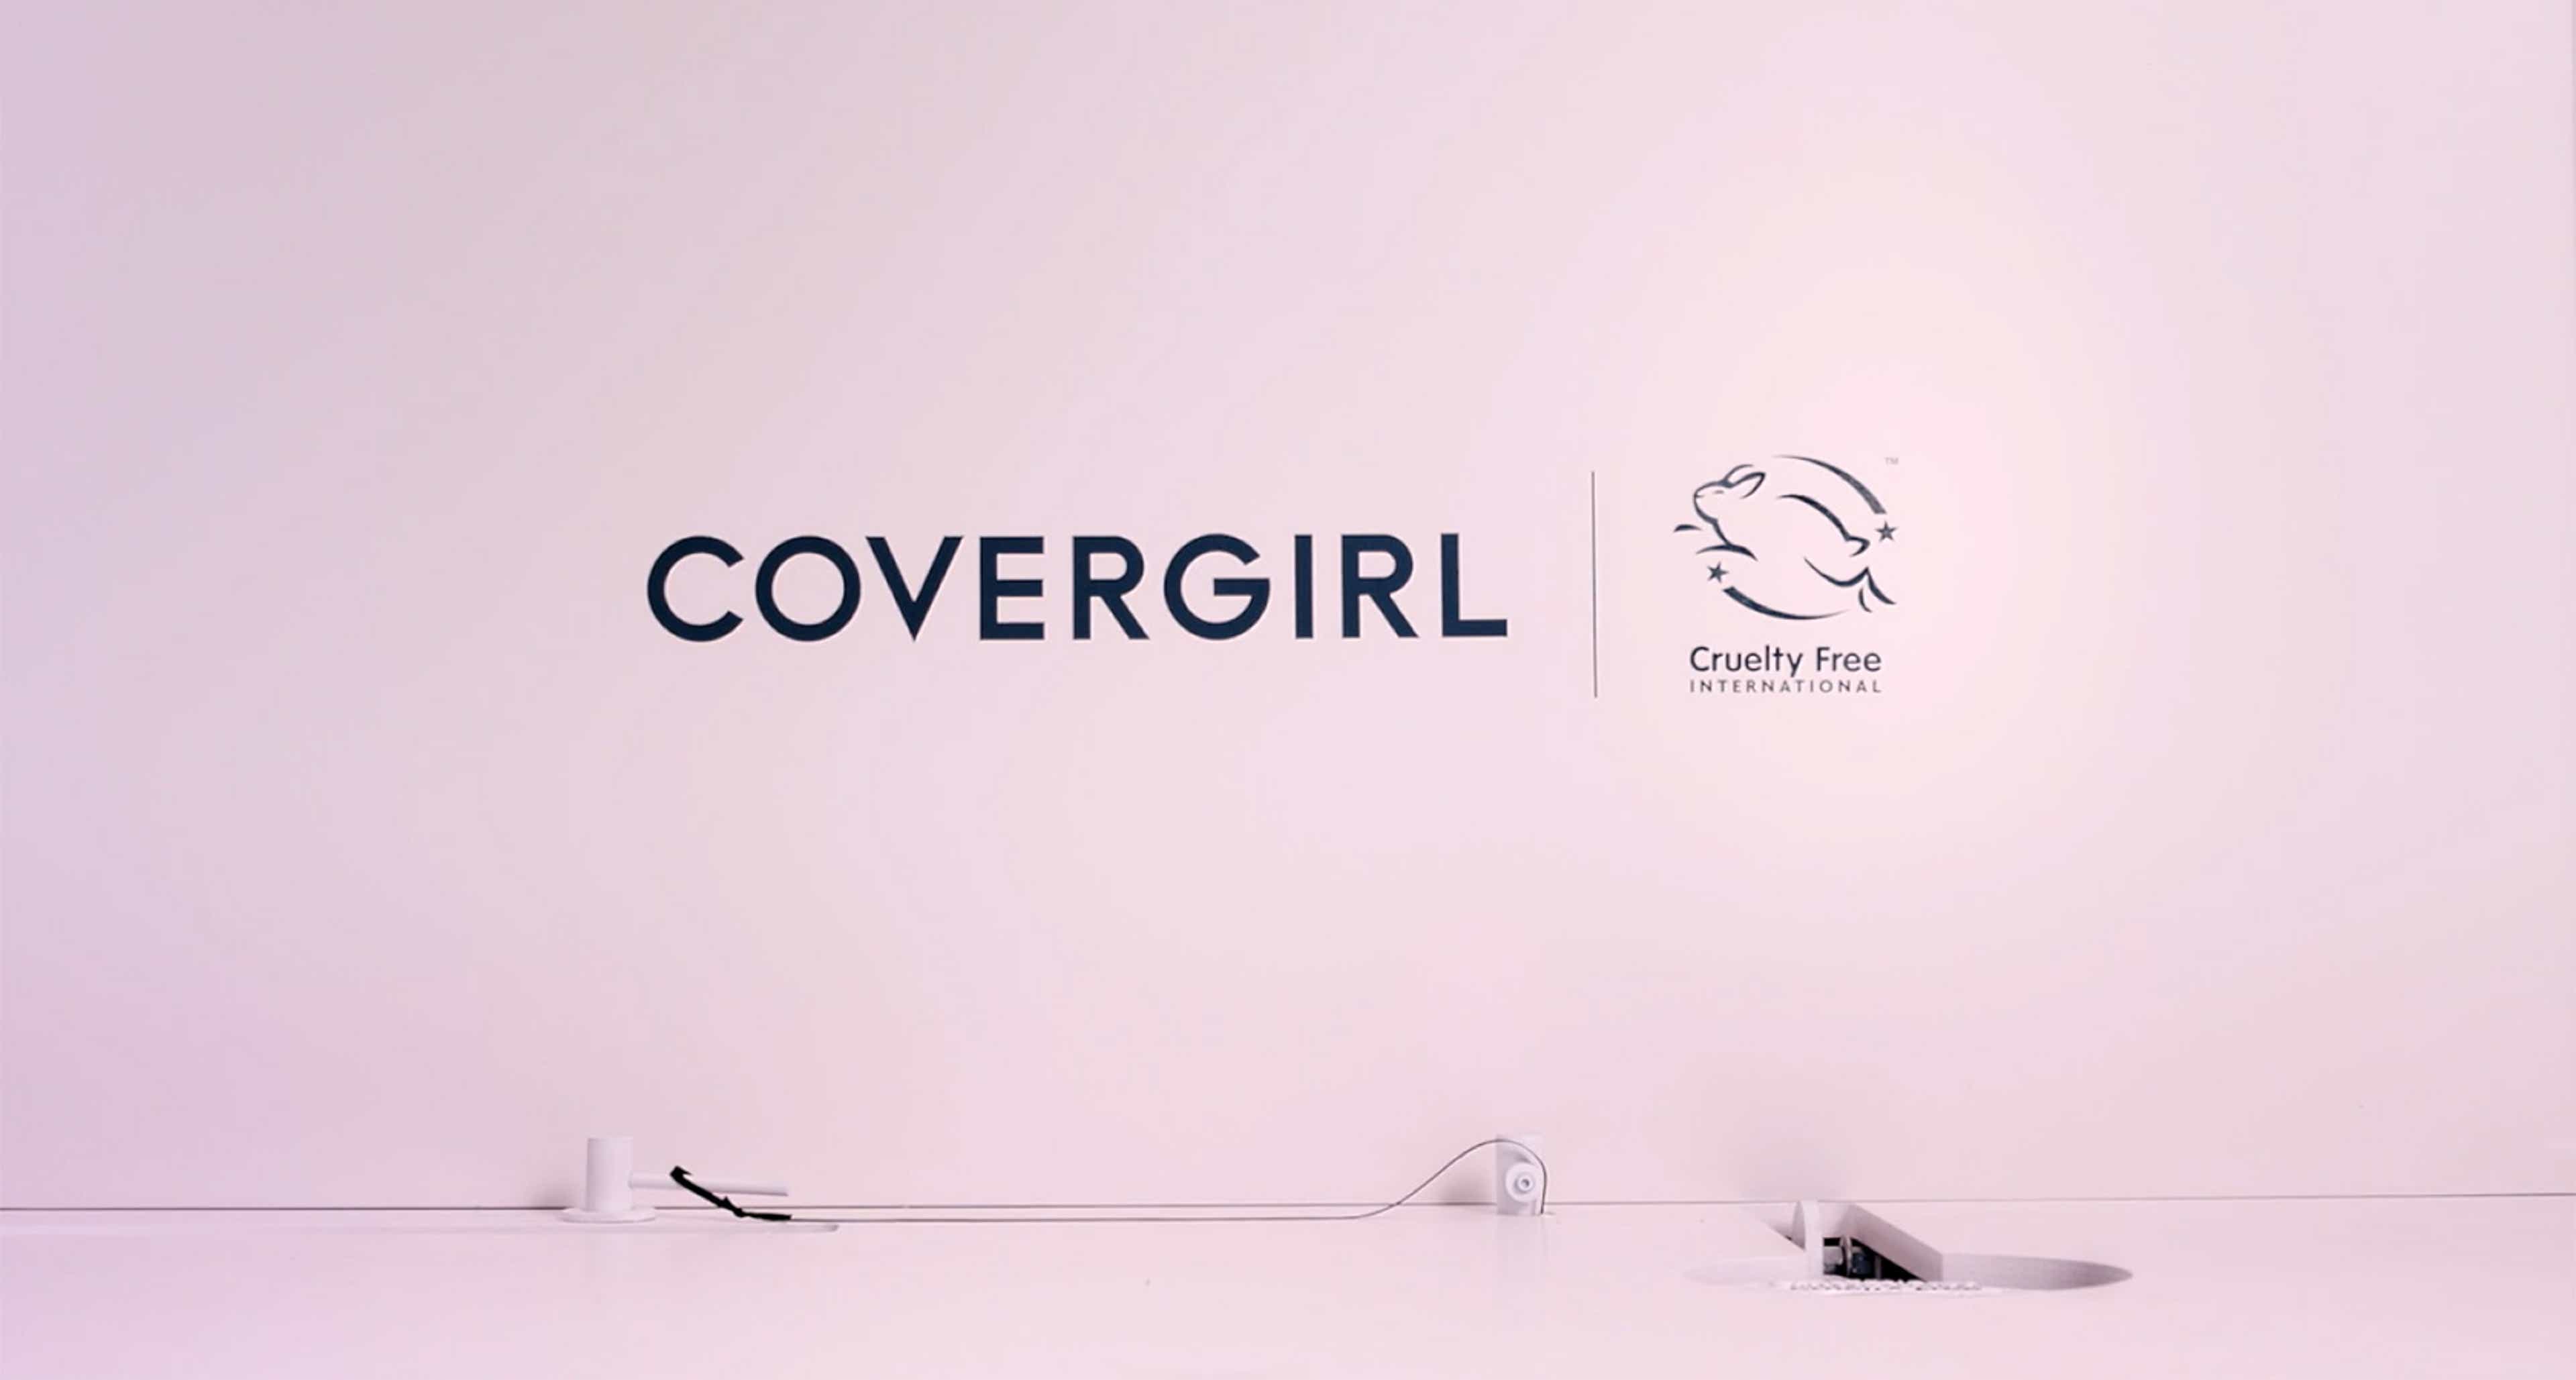 Coty's COVERGIRL becomes the largest makeup brand to be 'Leaping Bunny' certified by Cruelty Free International